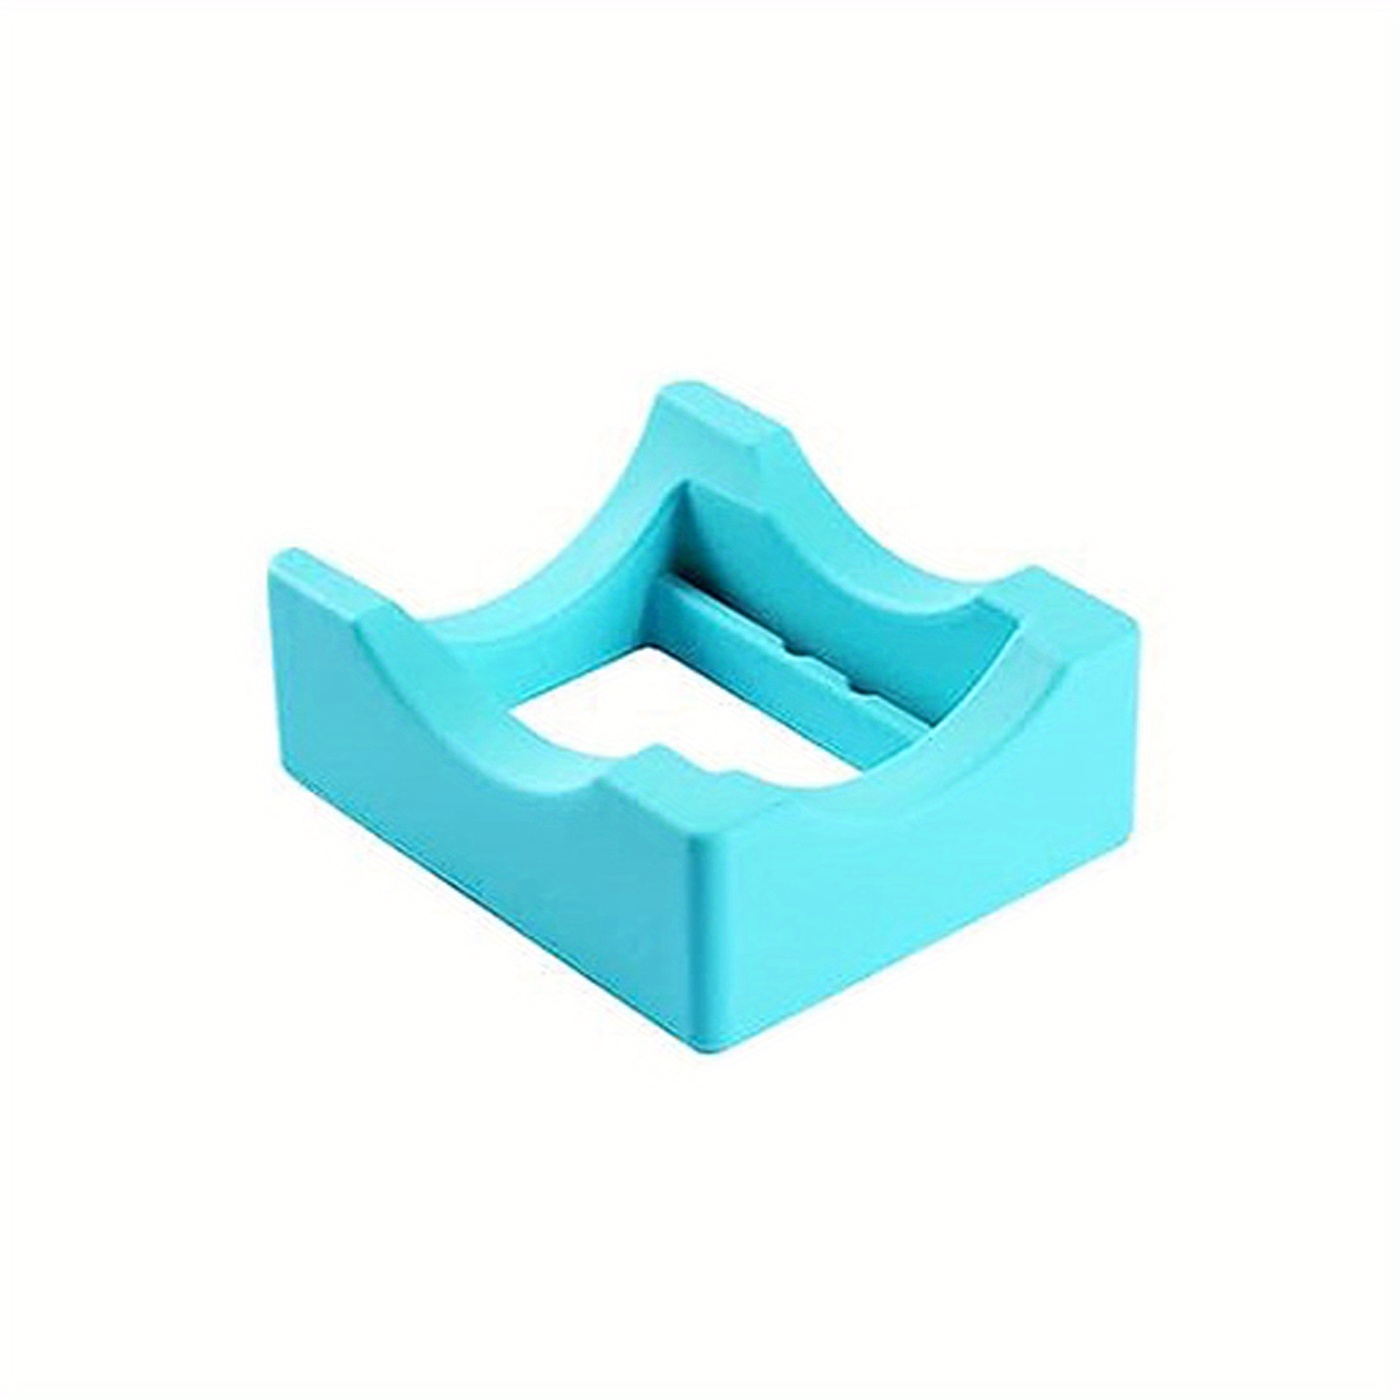 Small Silicone Cup Cradle，with Built-in Slot for Crafting